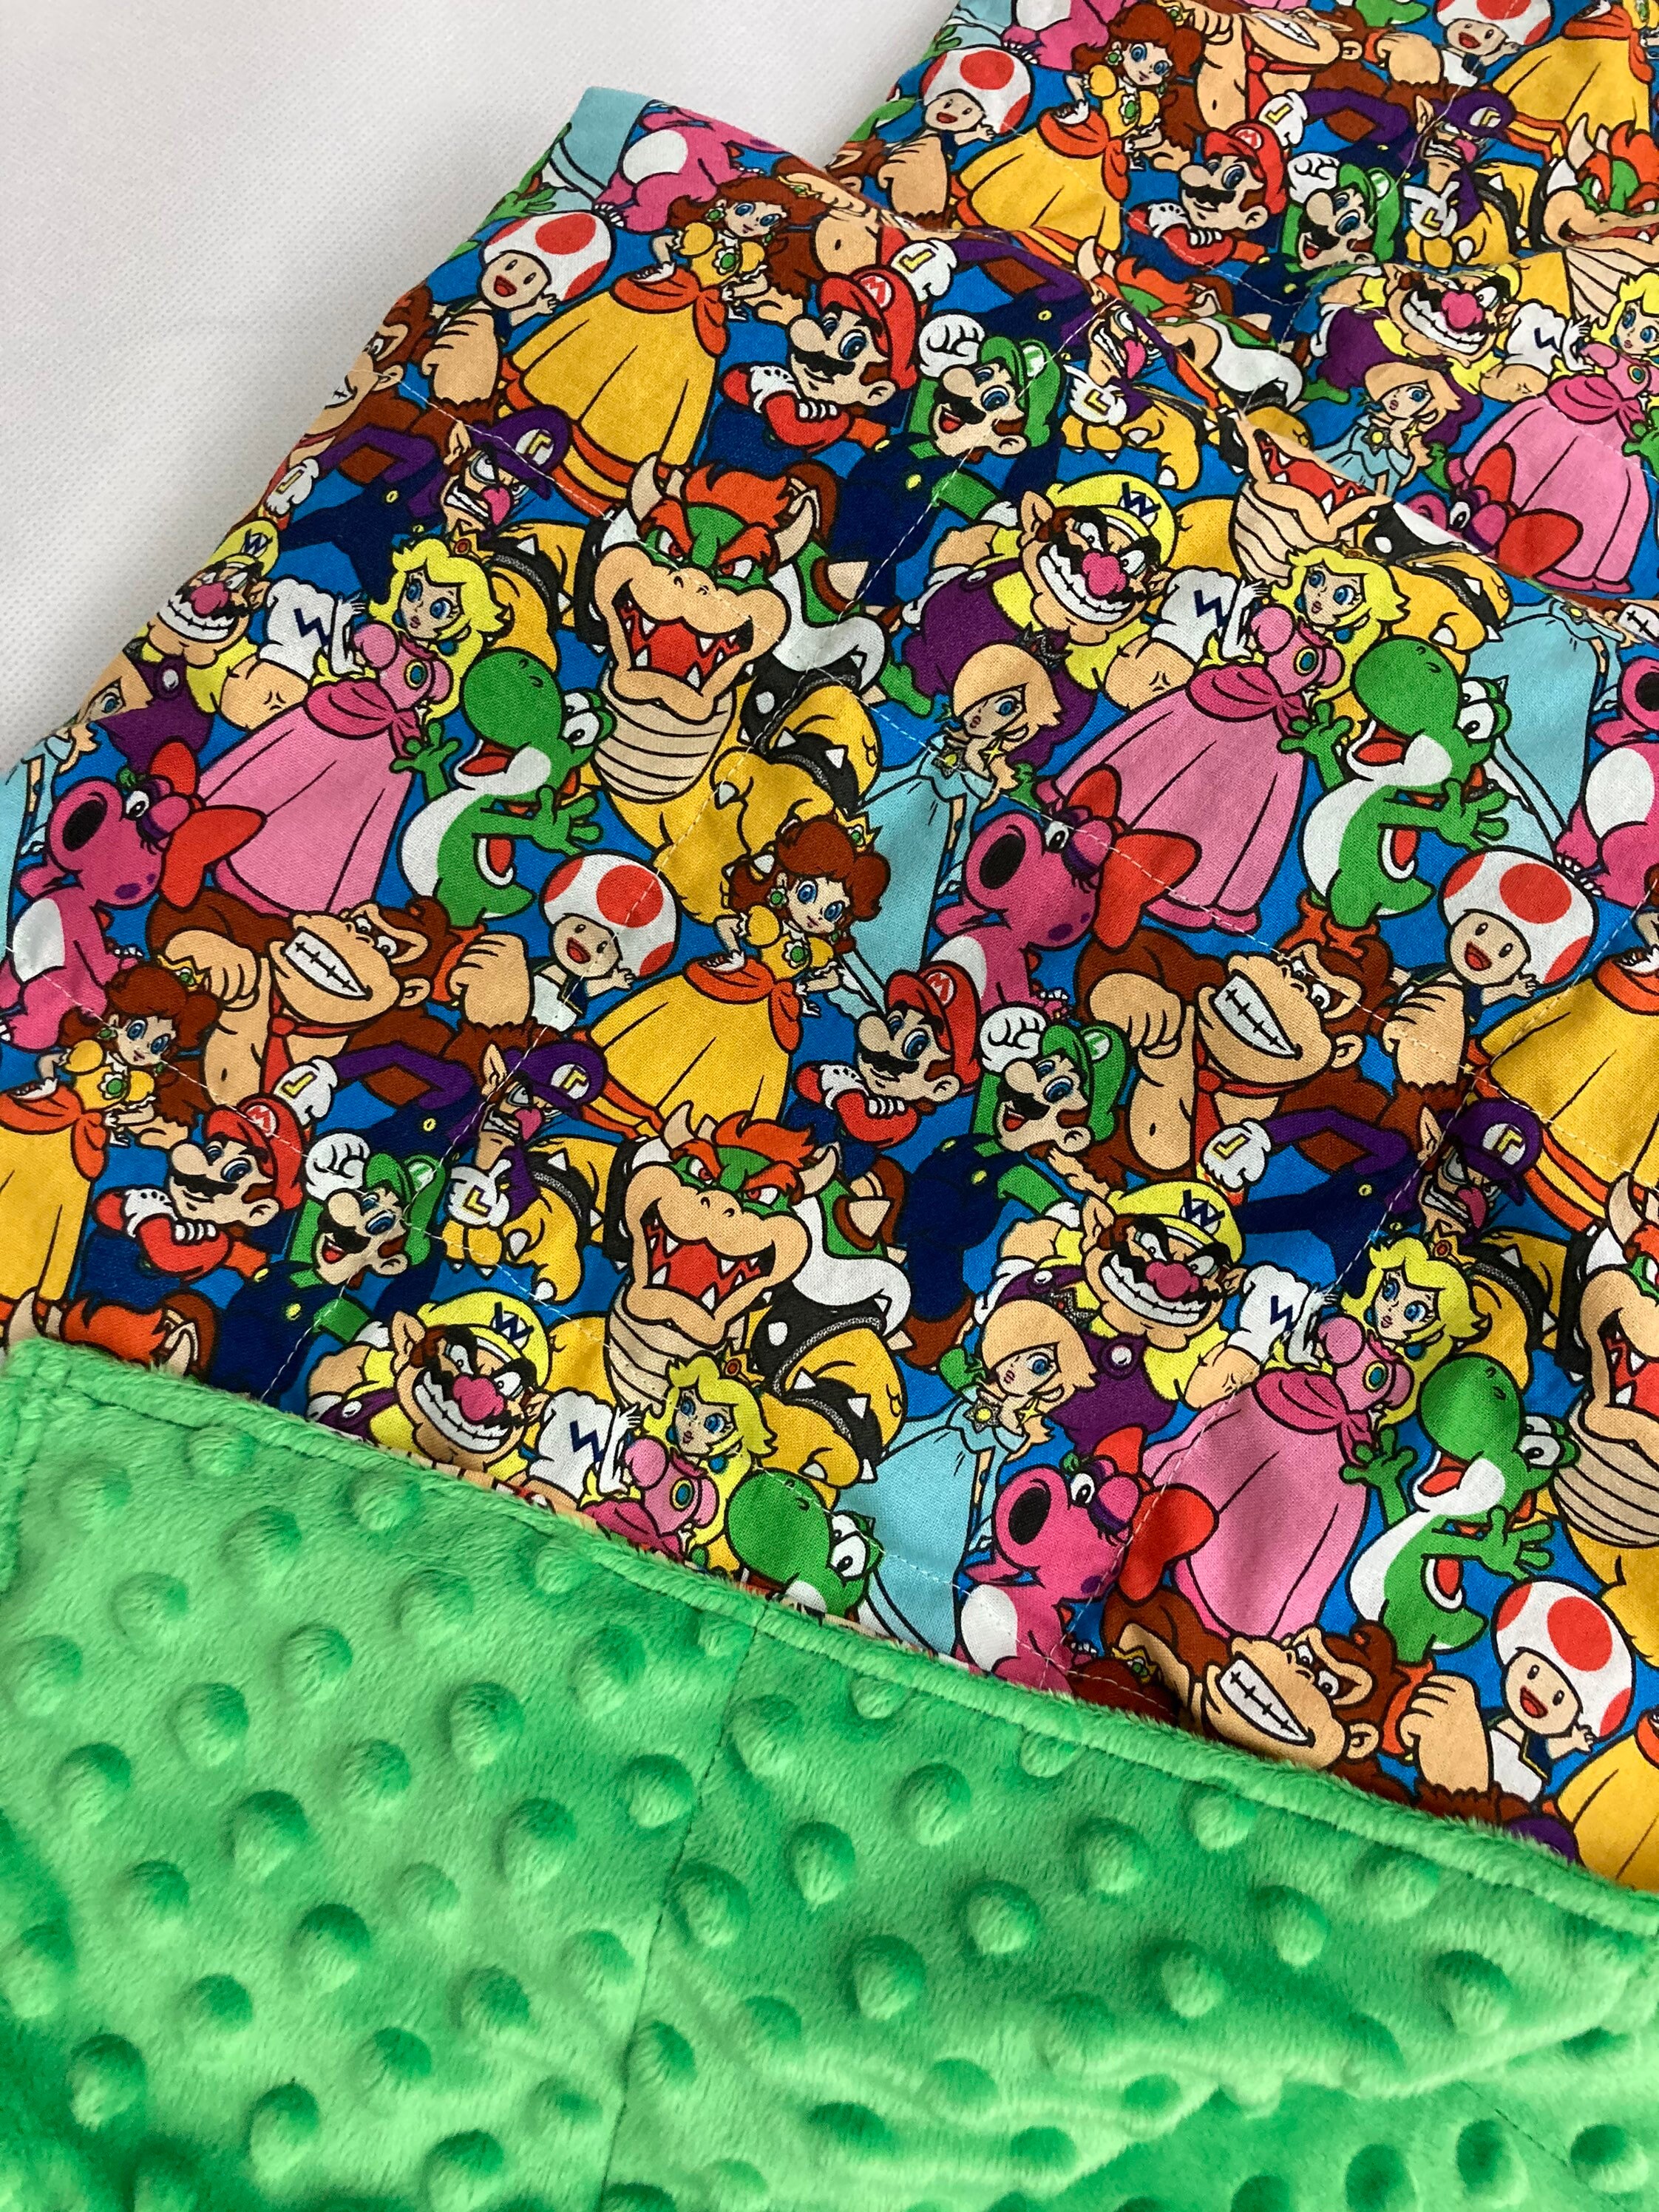 Mario Brothers Weighted Blanket or Lap Pad Cotton Fabric | Etsy